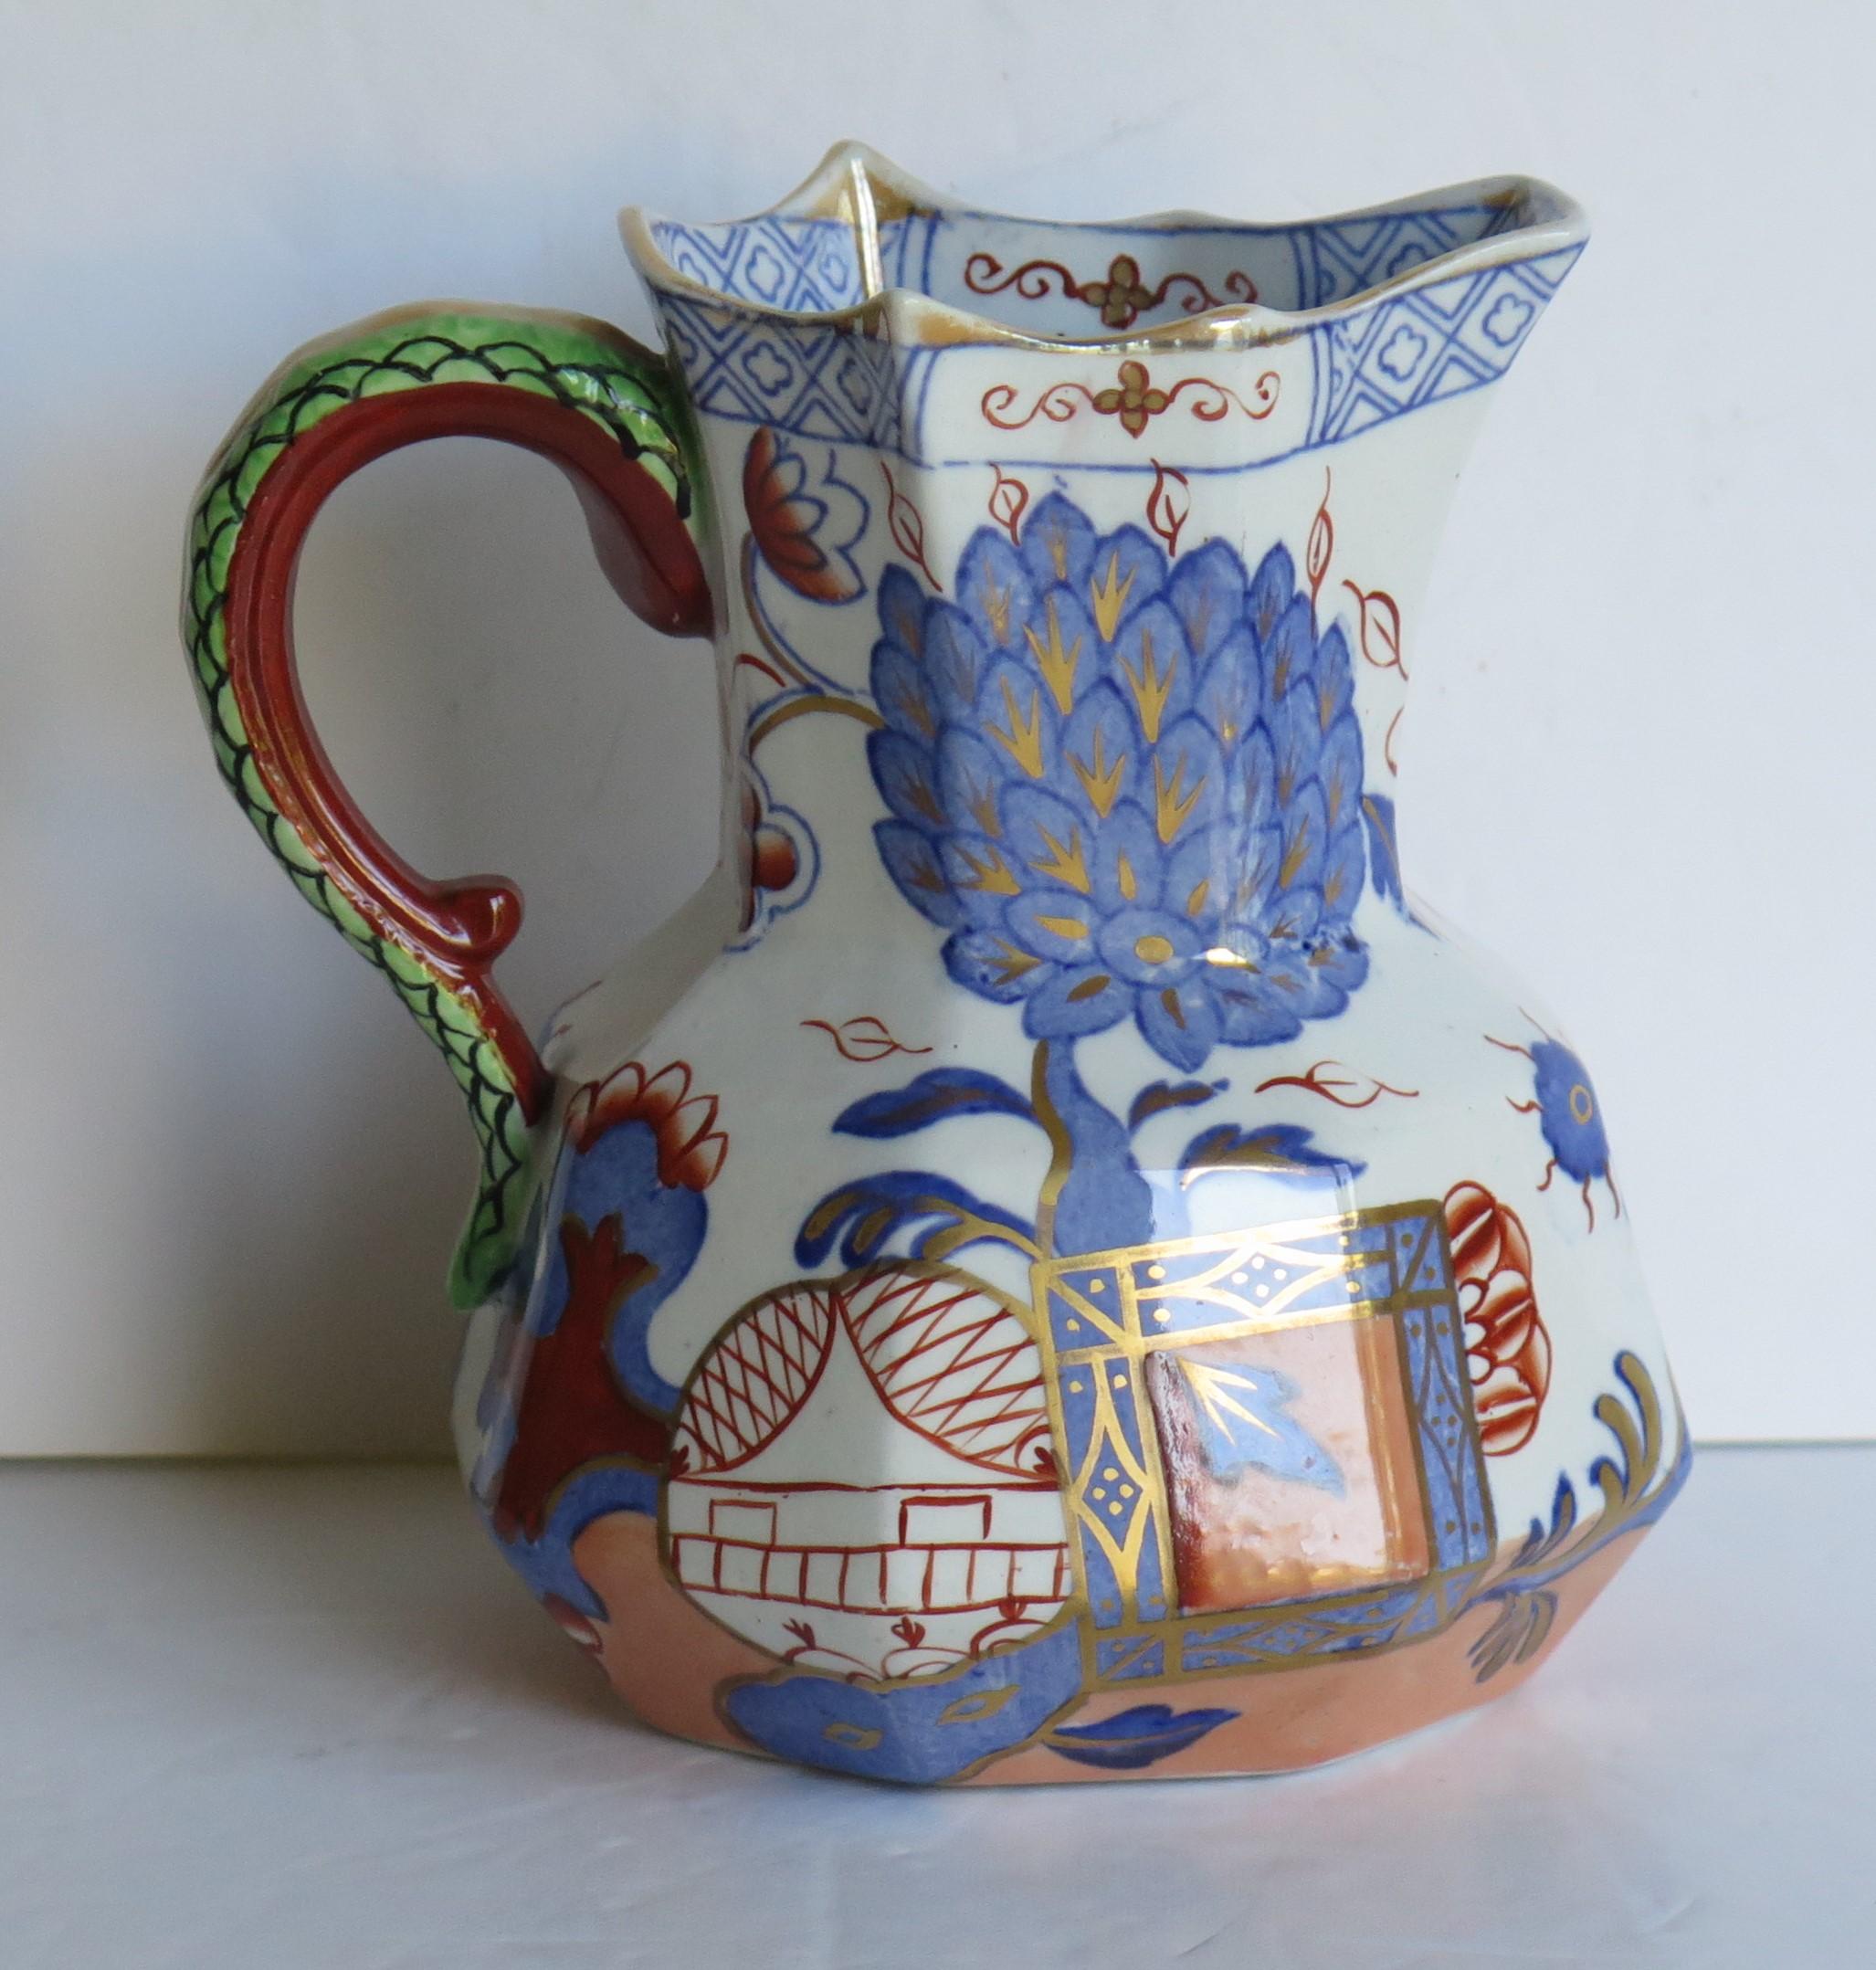 This is a very good Ironstone hydra jug or pitcher in the jardinière pattern and made by Mason's Ironstone, England, circa 1870.

The pattern is a known Mason's chinoiserie pattern called 